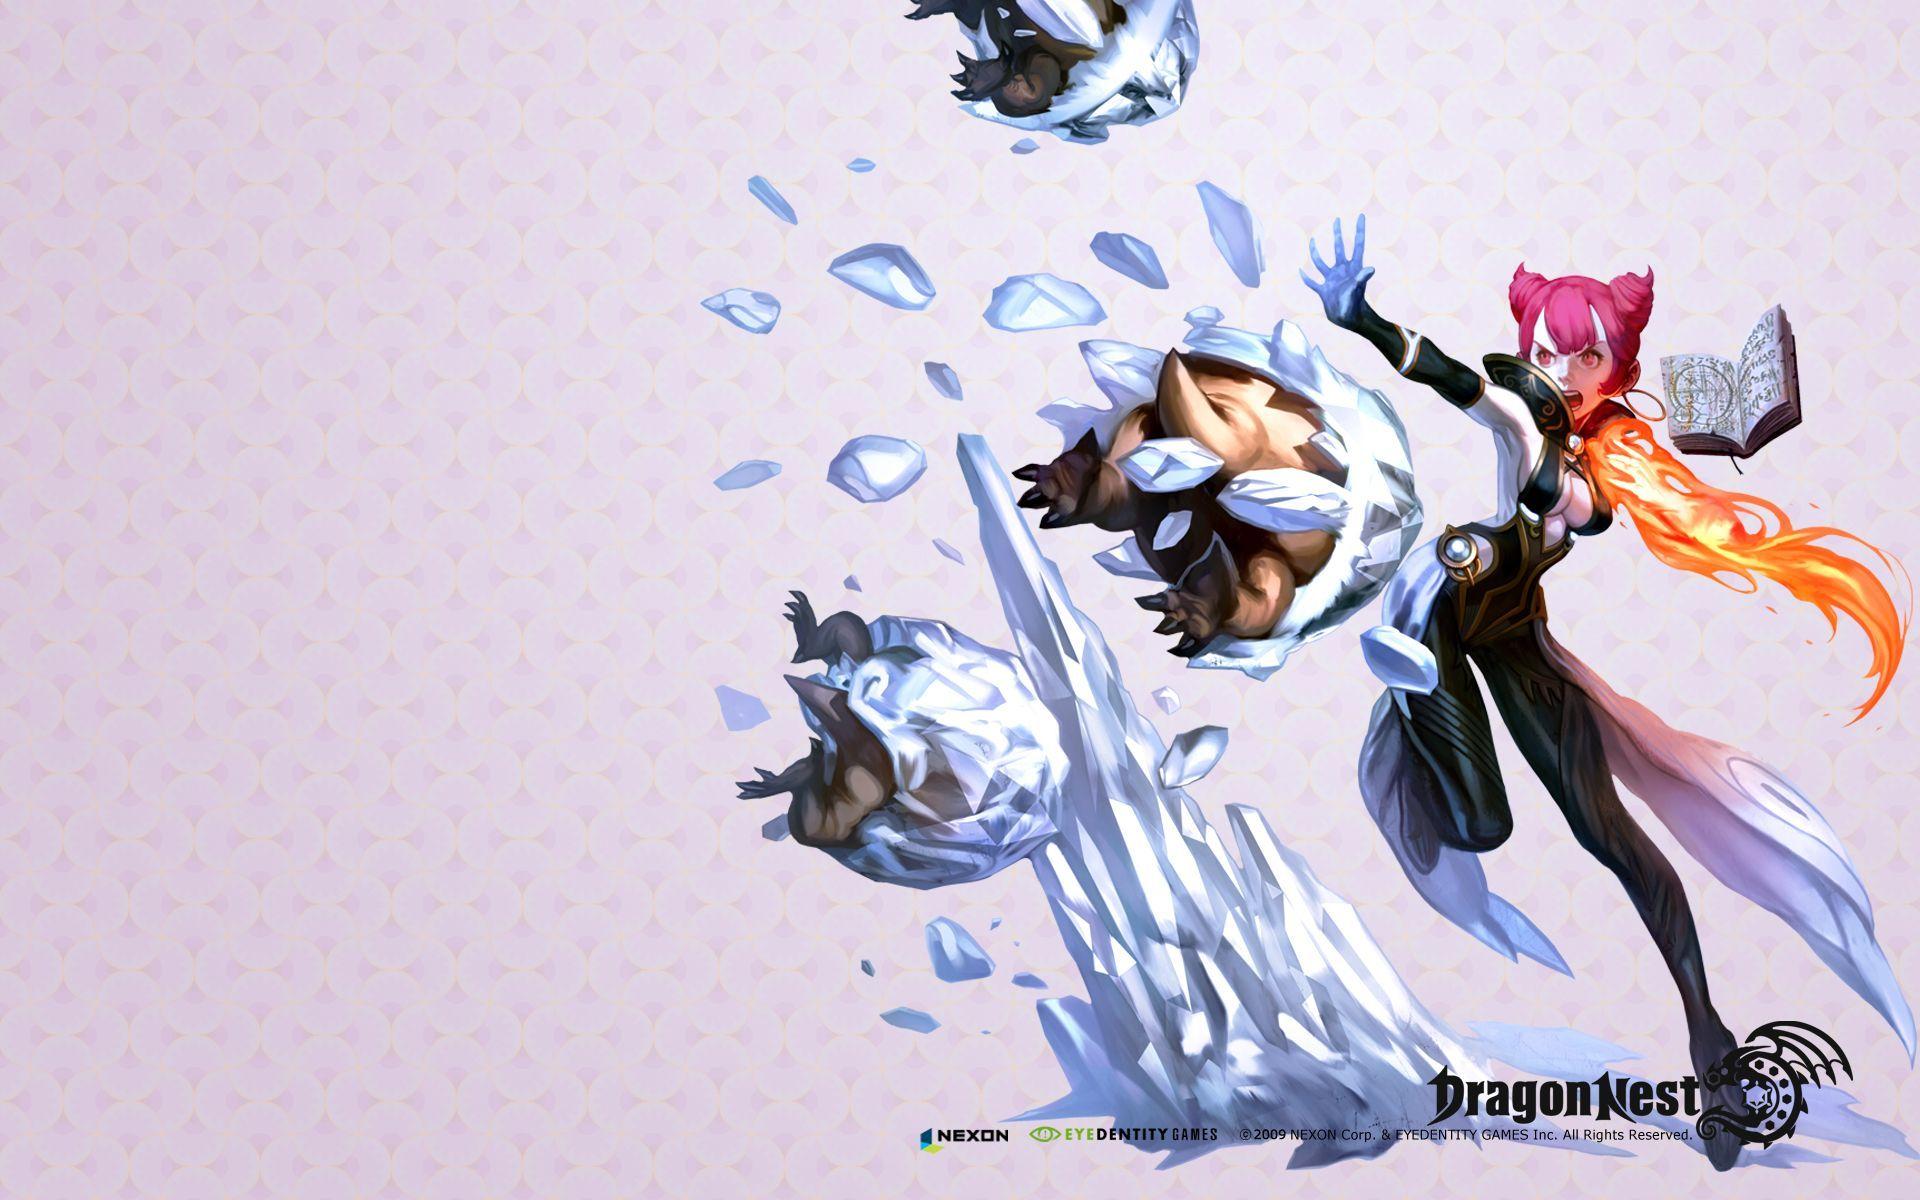 Dragon Nest Wallpaper Collection For Free Download. HD Wallpaper